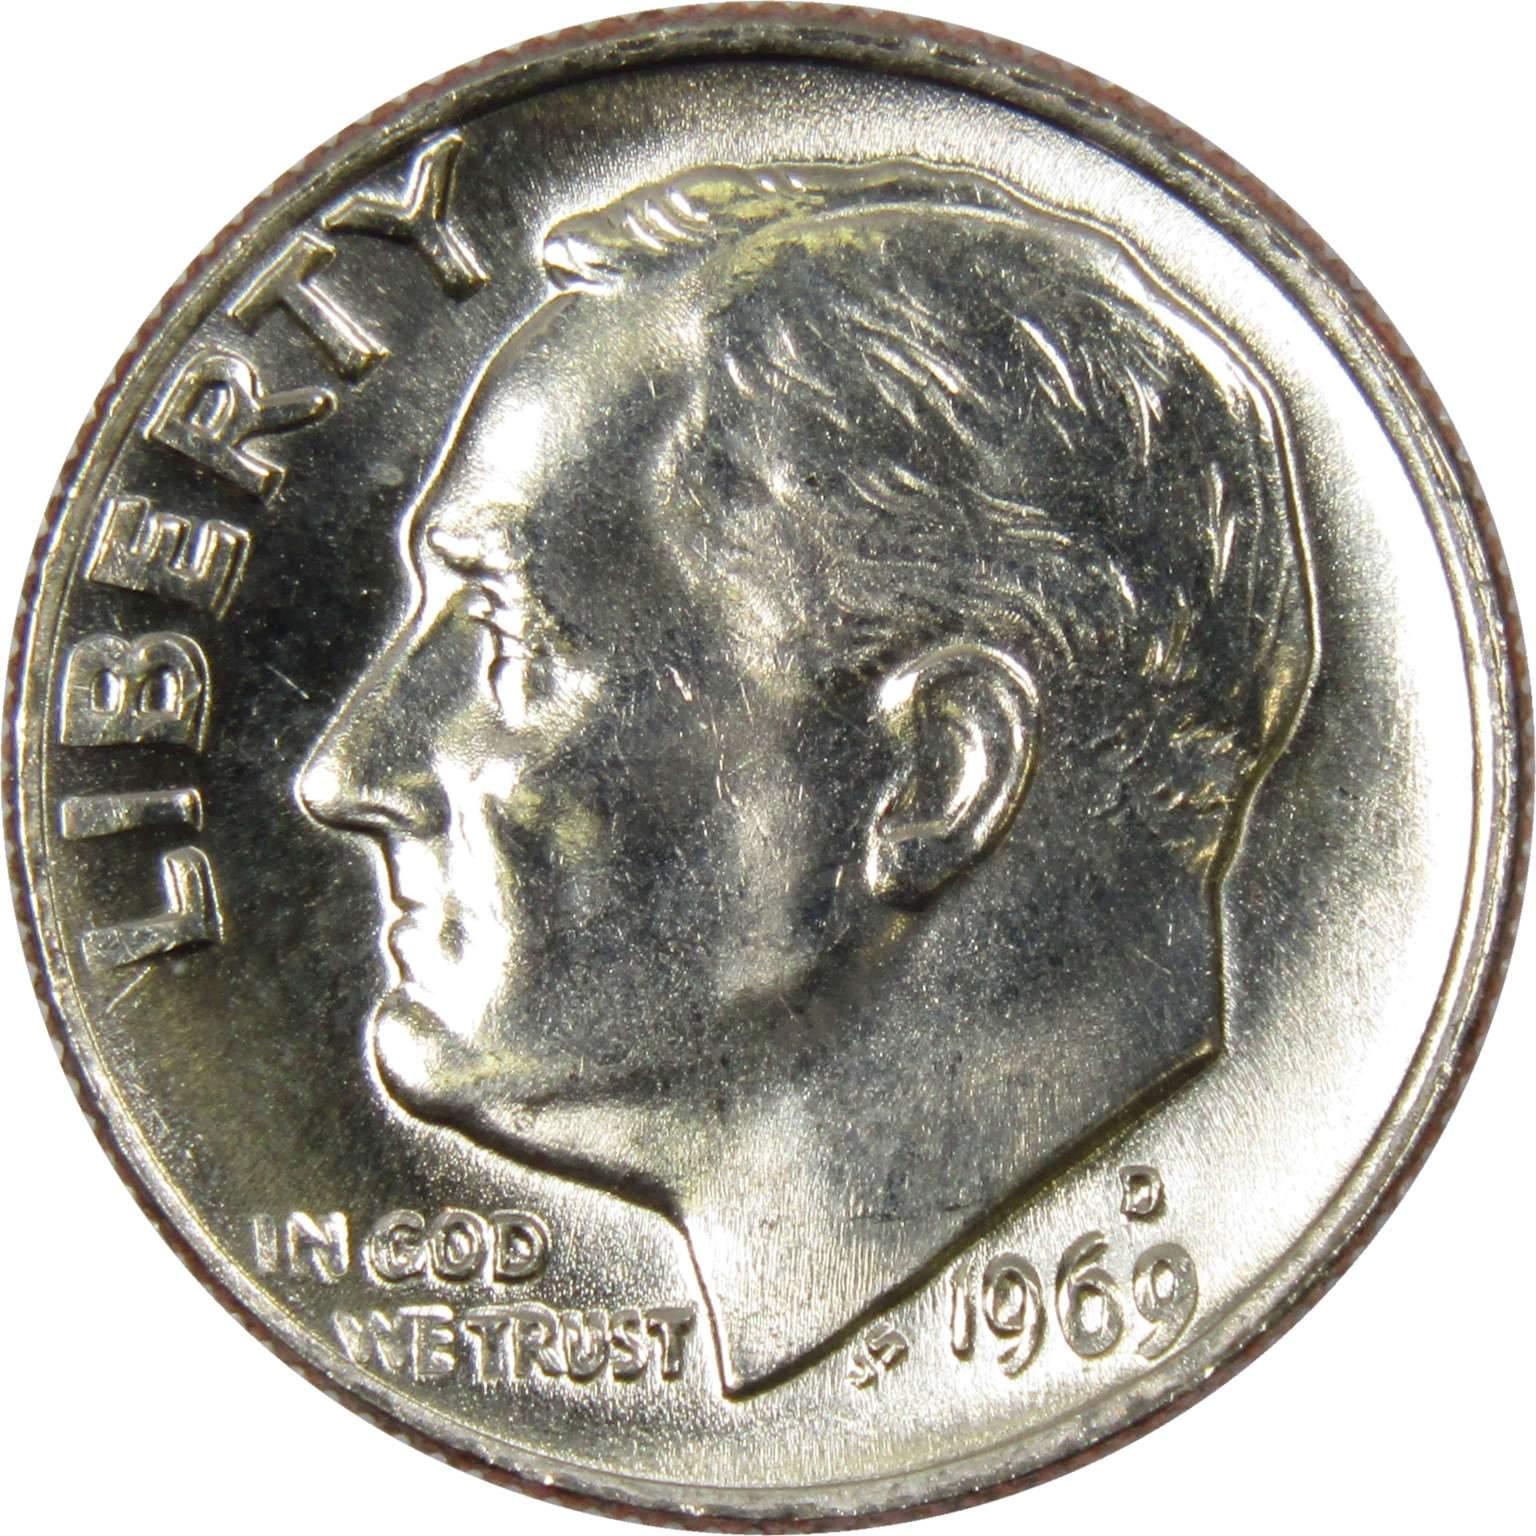 1969 D Roosevelt Dime BU Uncirculated Mint State 10c US Coin Collectible